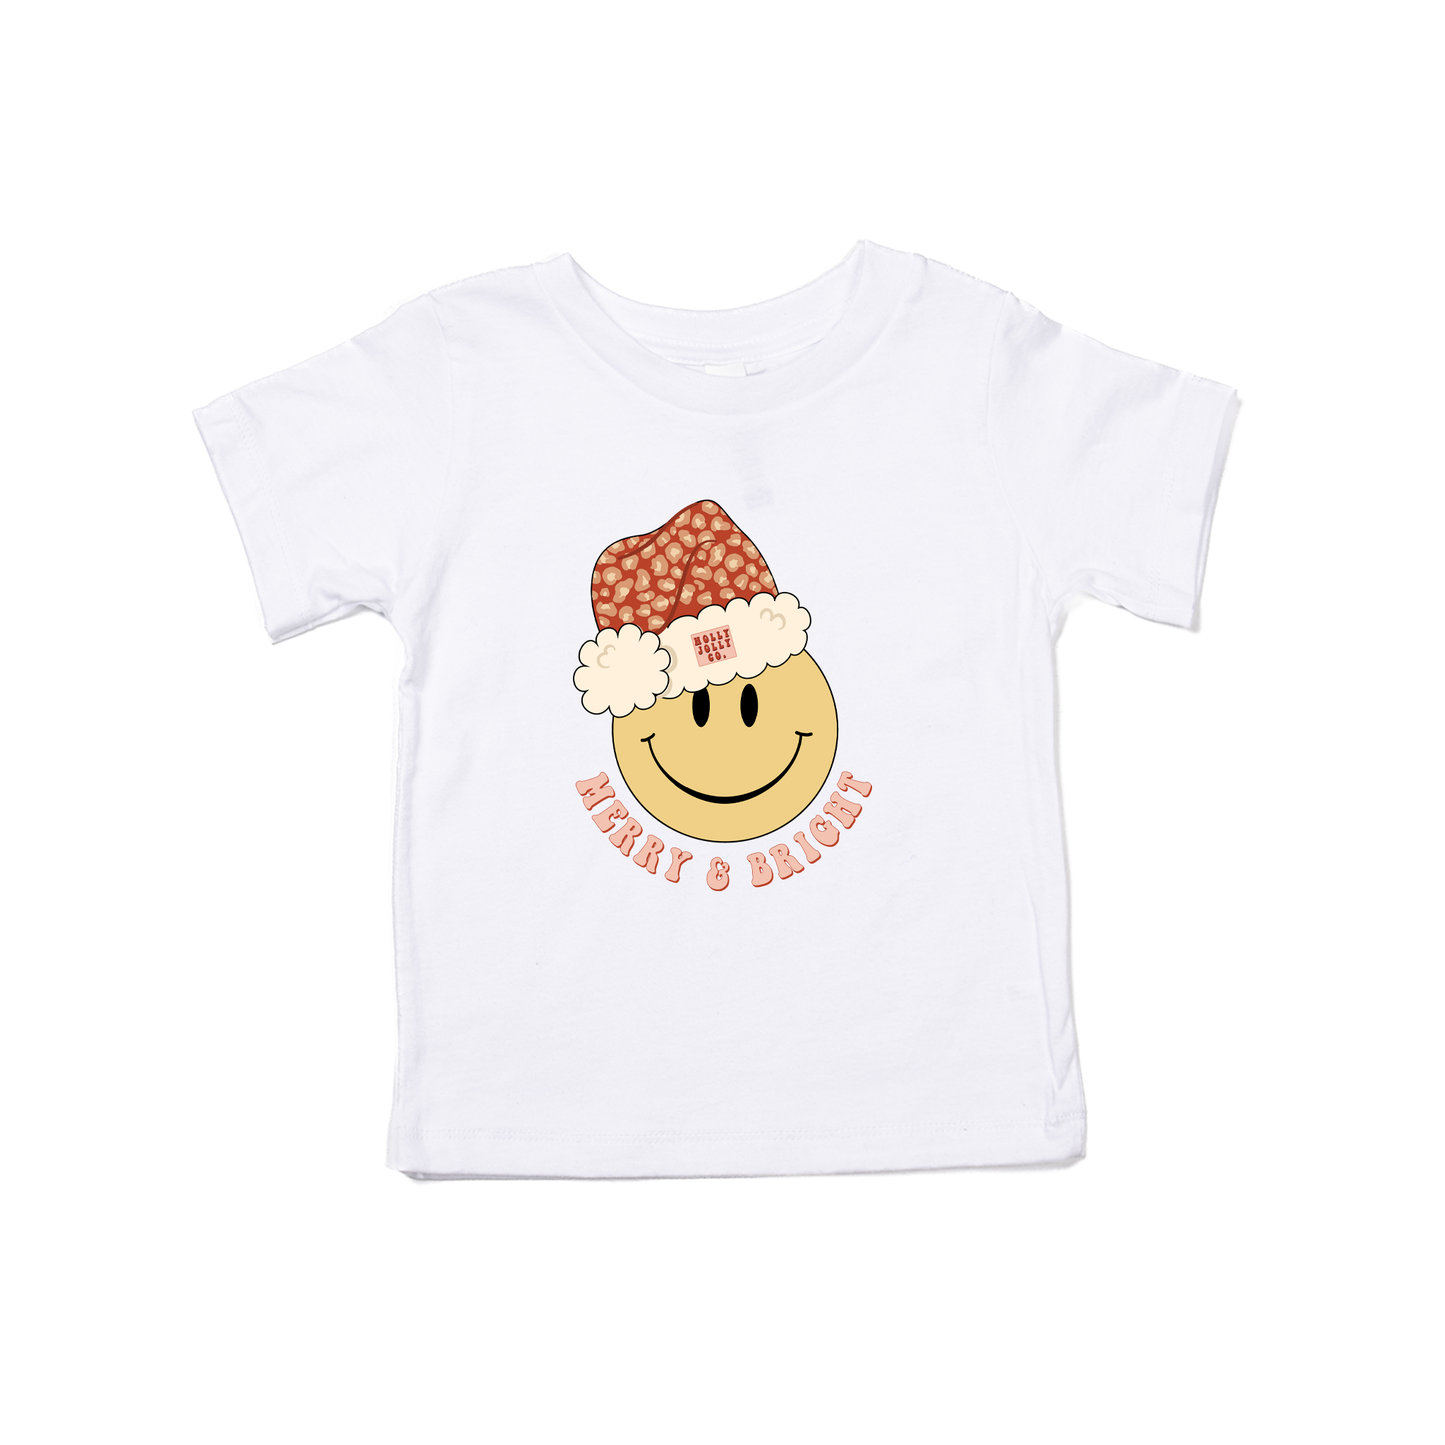 Merry & Bright Smiley Face - Kids Tee (White)